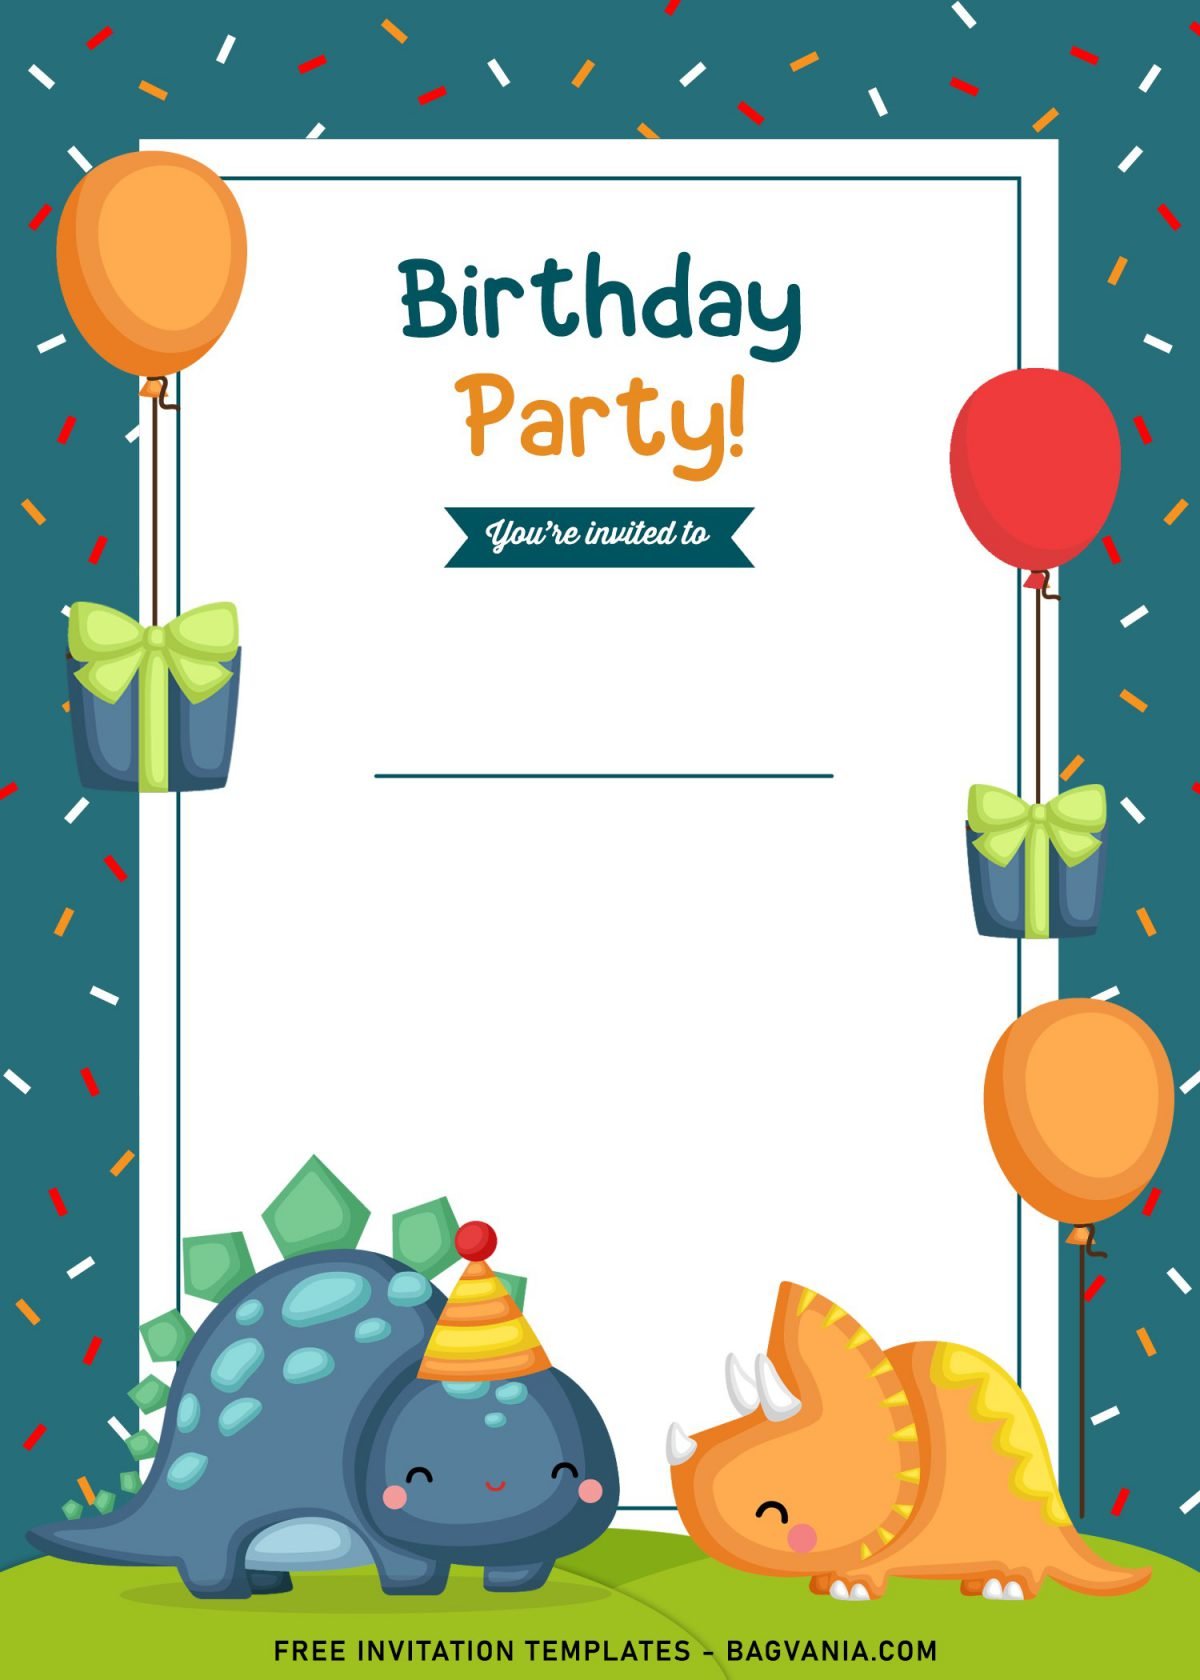 9+ Awesome Dino Party Birthday Invitation Templates and has cute Baby Stegosaurus wearing Birthday hat